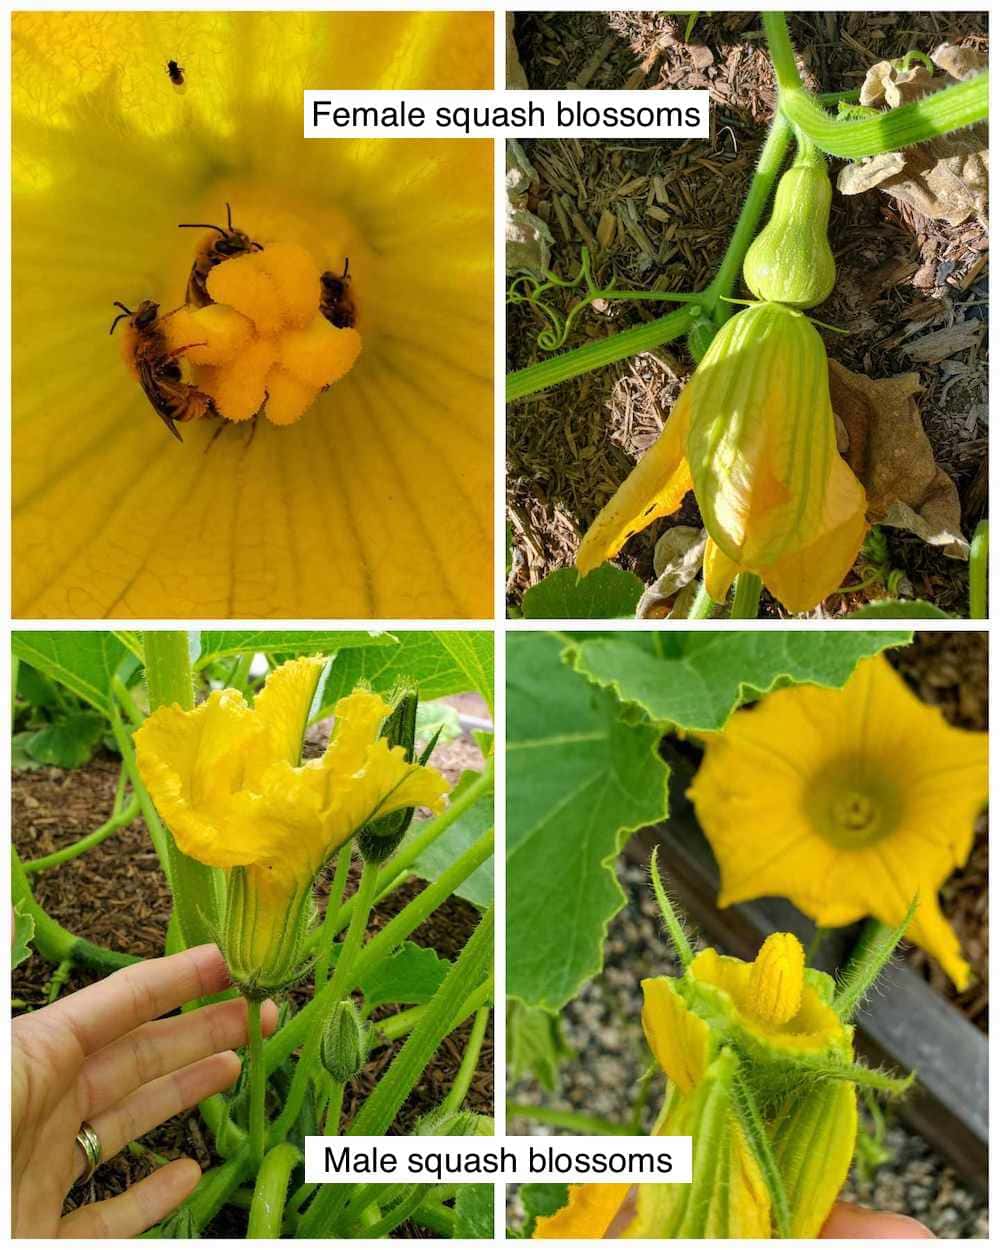 A four way image collage, the first image shows the inside of a squash blossom that has three squash bees collecting pollen. The second image shows a small butternut squash that has just opened its flower to be pollinated. The third image shows a male squash flower, the fourth image shows a the inside of a male squash flower. 